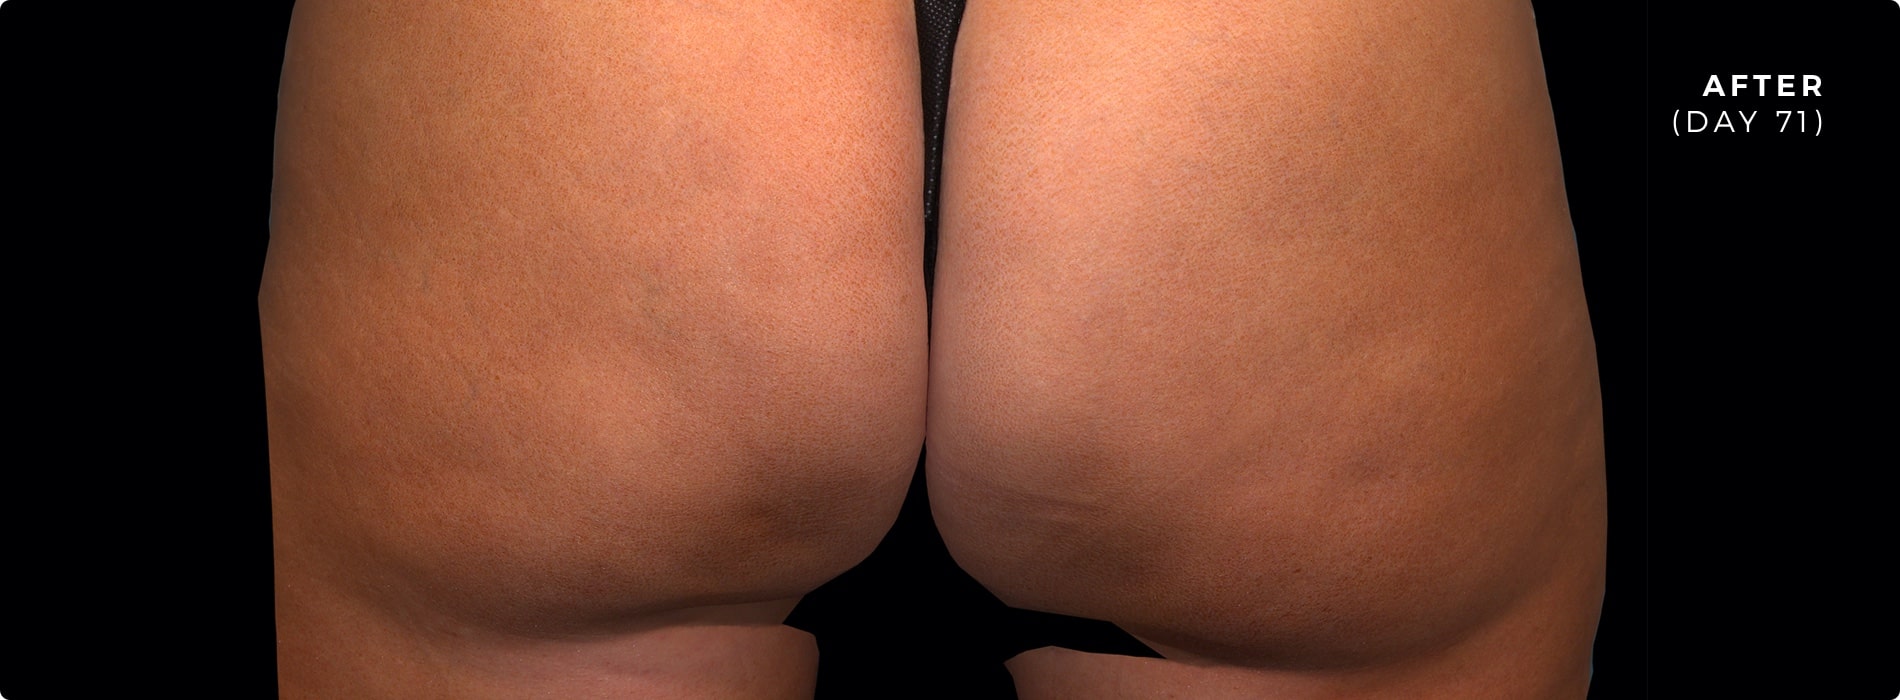 71 days after QWO for cellulite